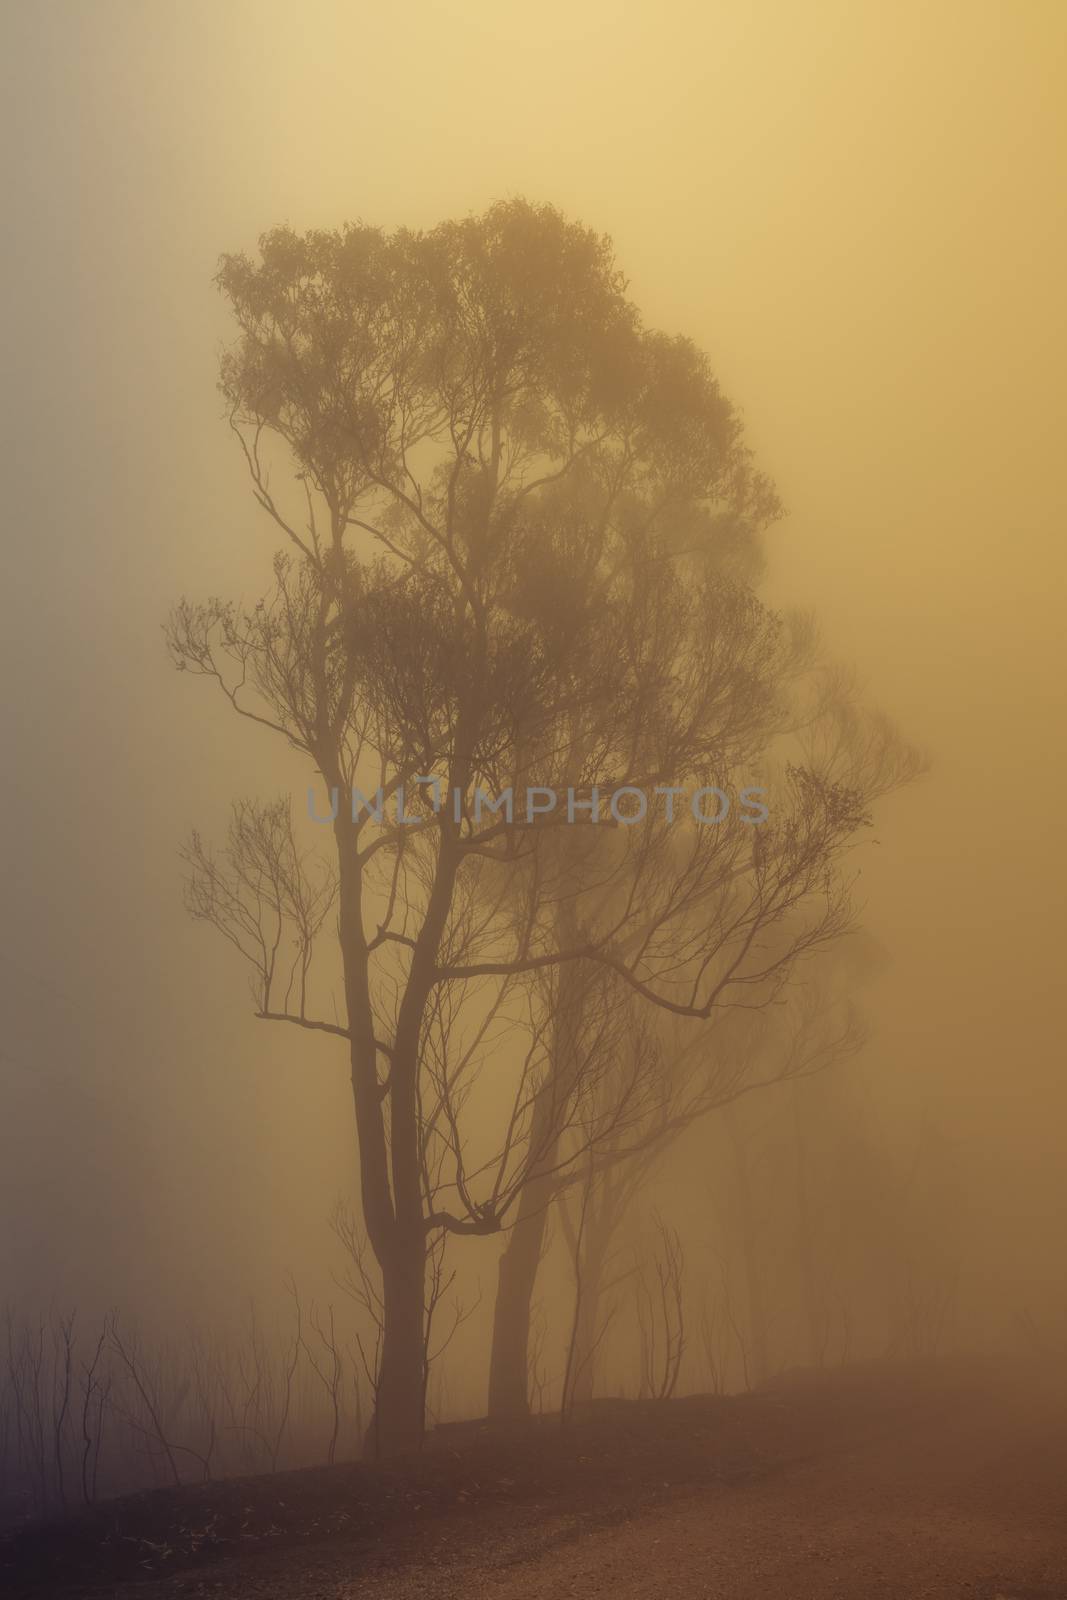 Gum trees in thick fog affected by bushfire in The Blue Mountains in Australia by WittkePhotos